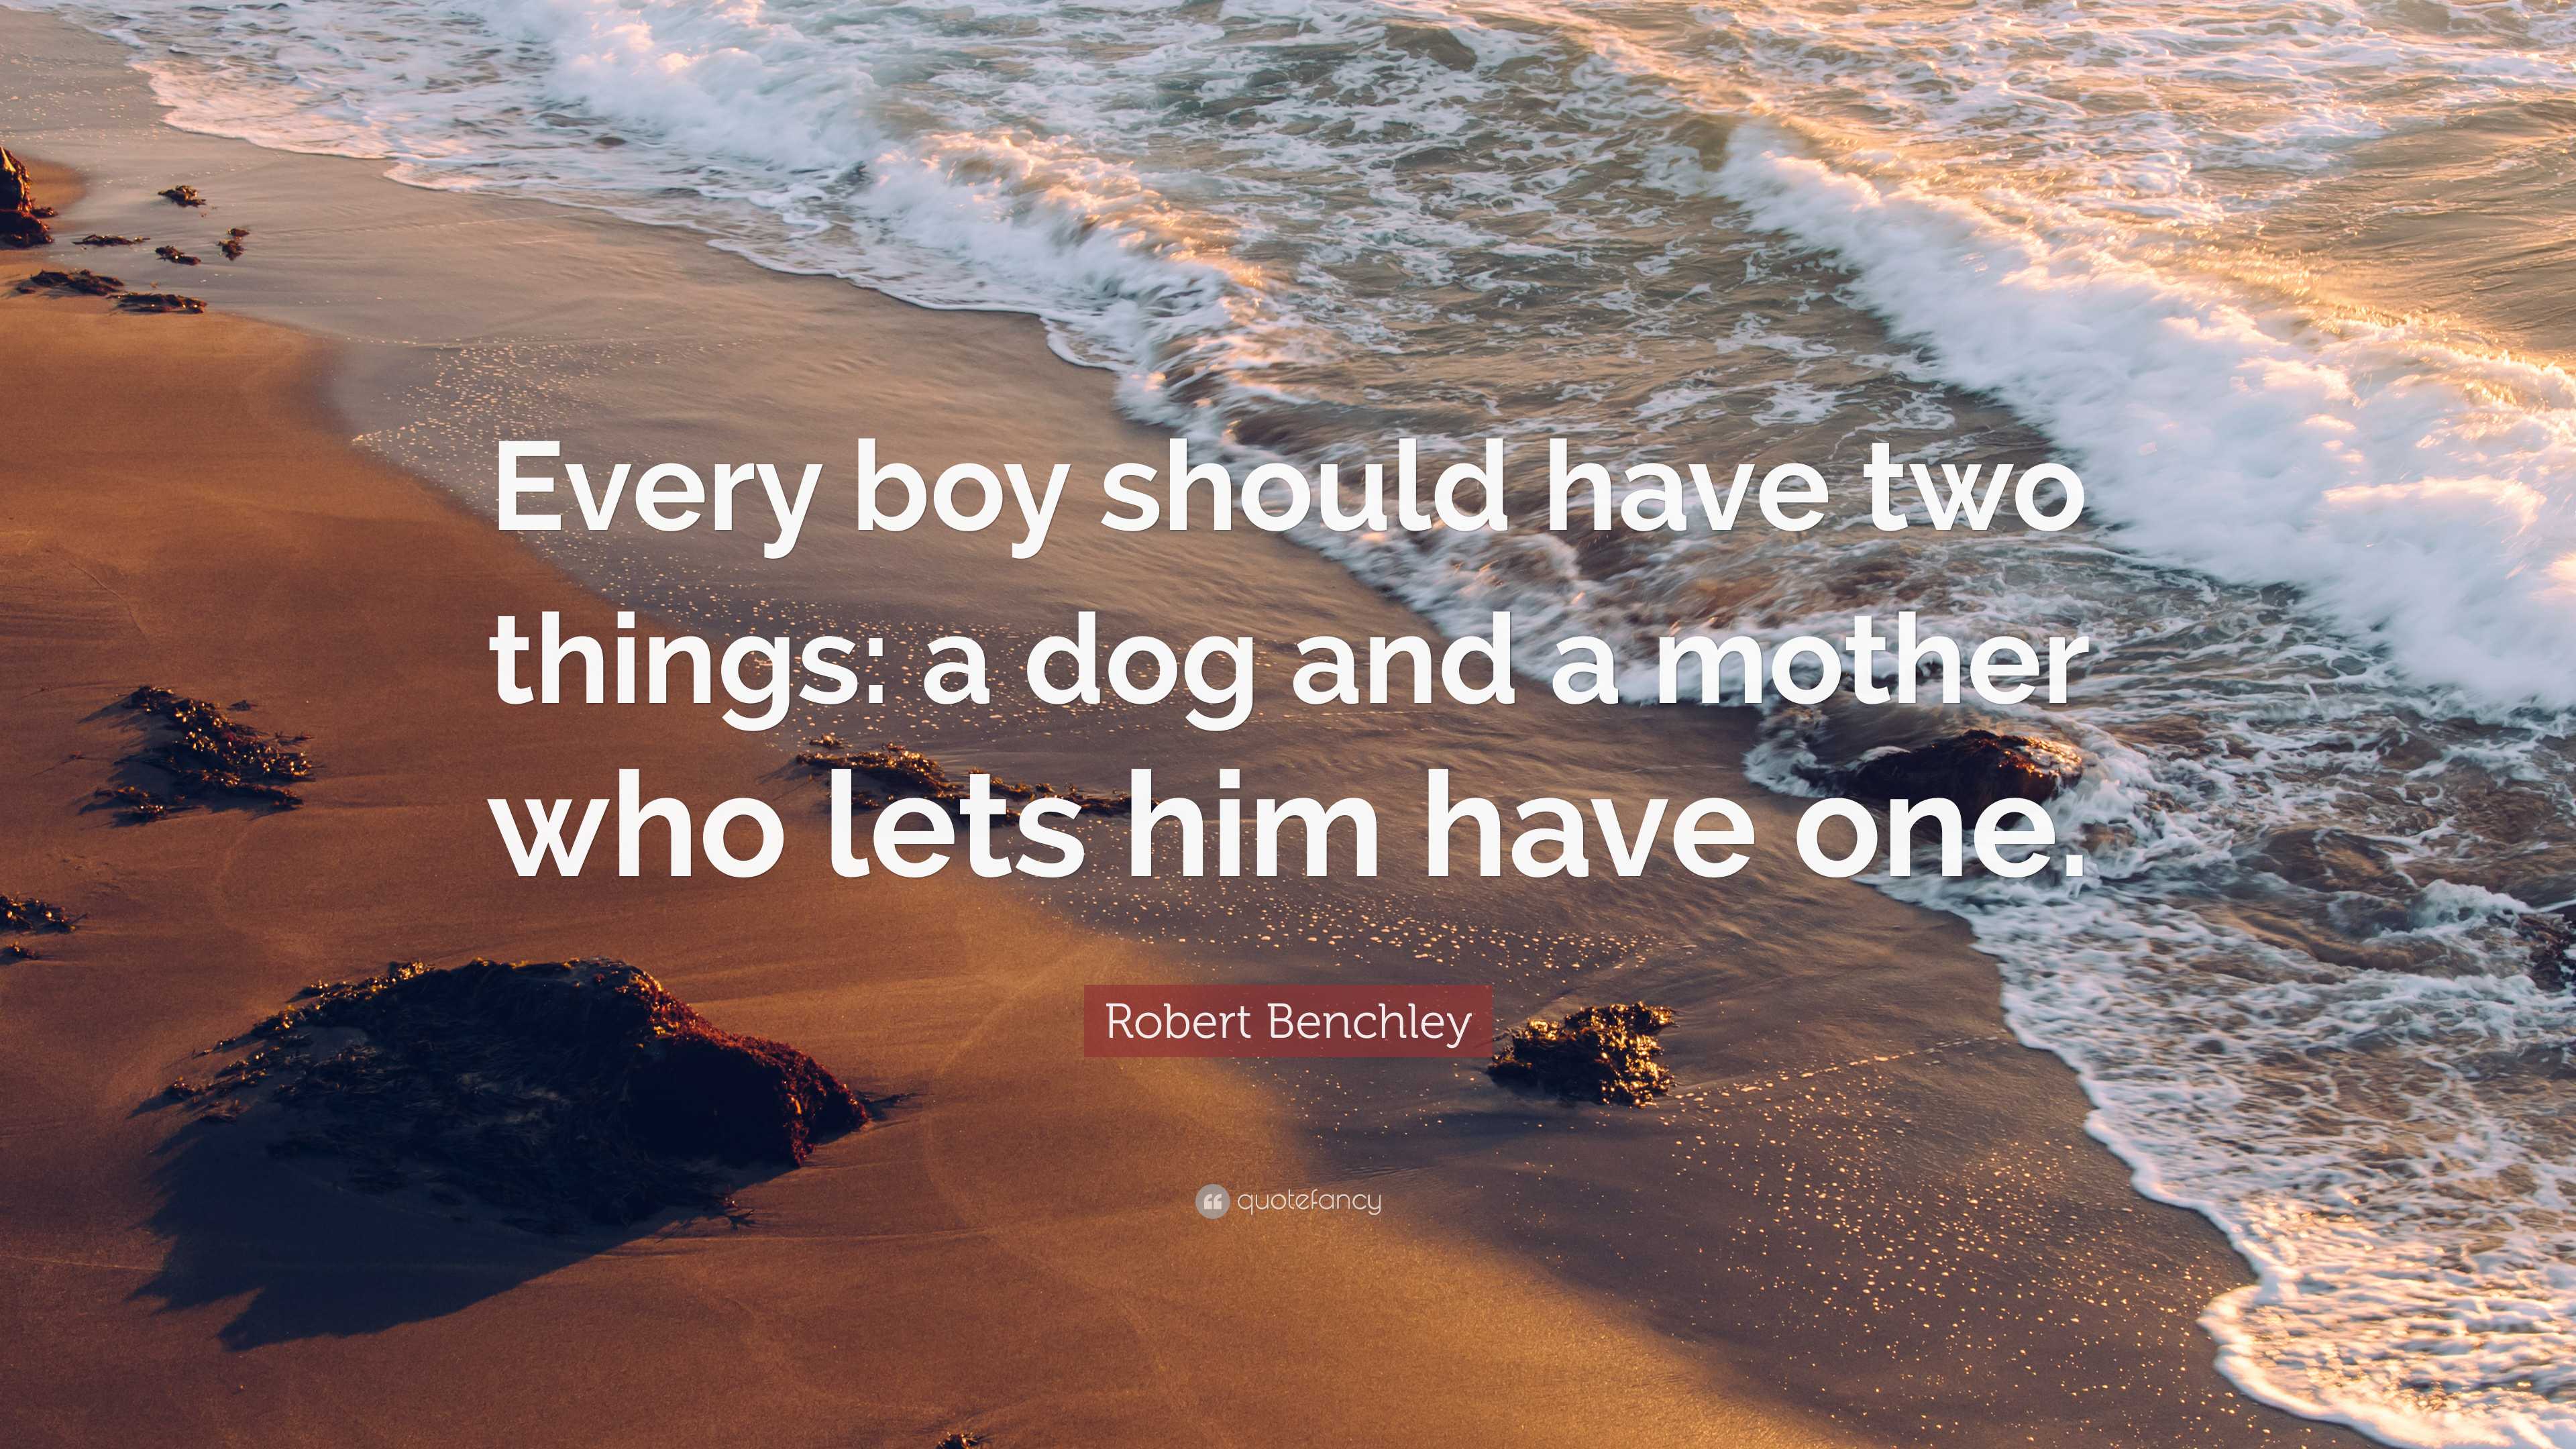 Every boy should have two things: A dog and a family willing to